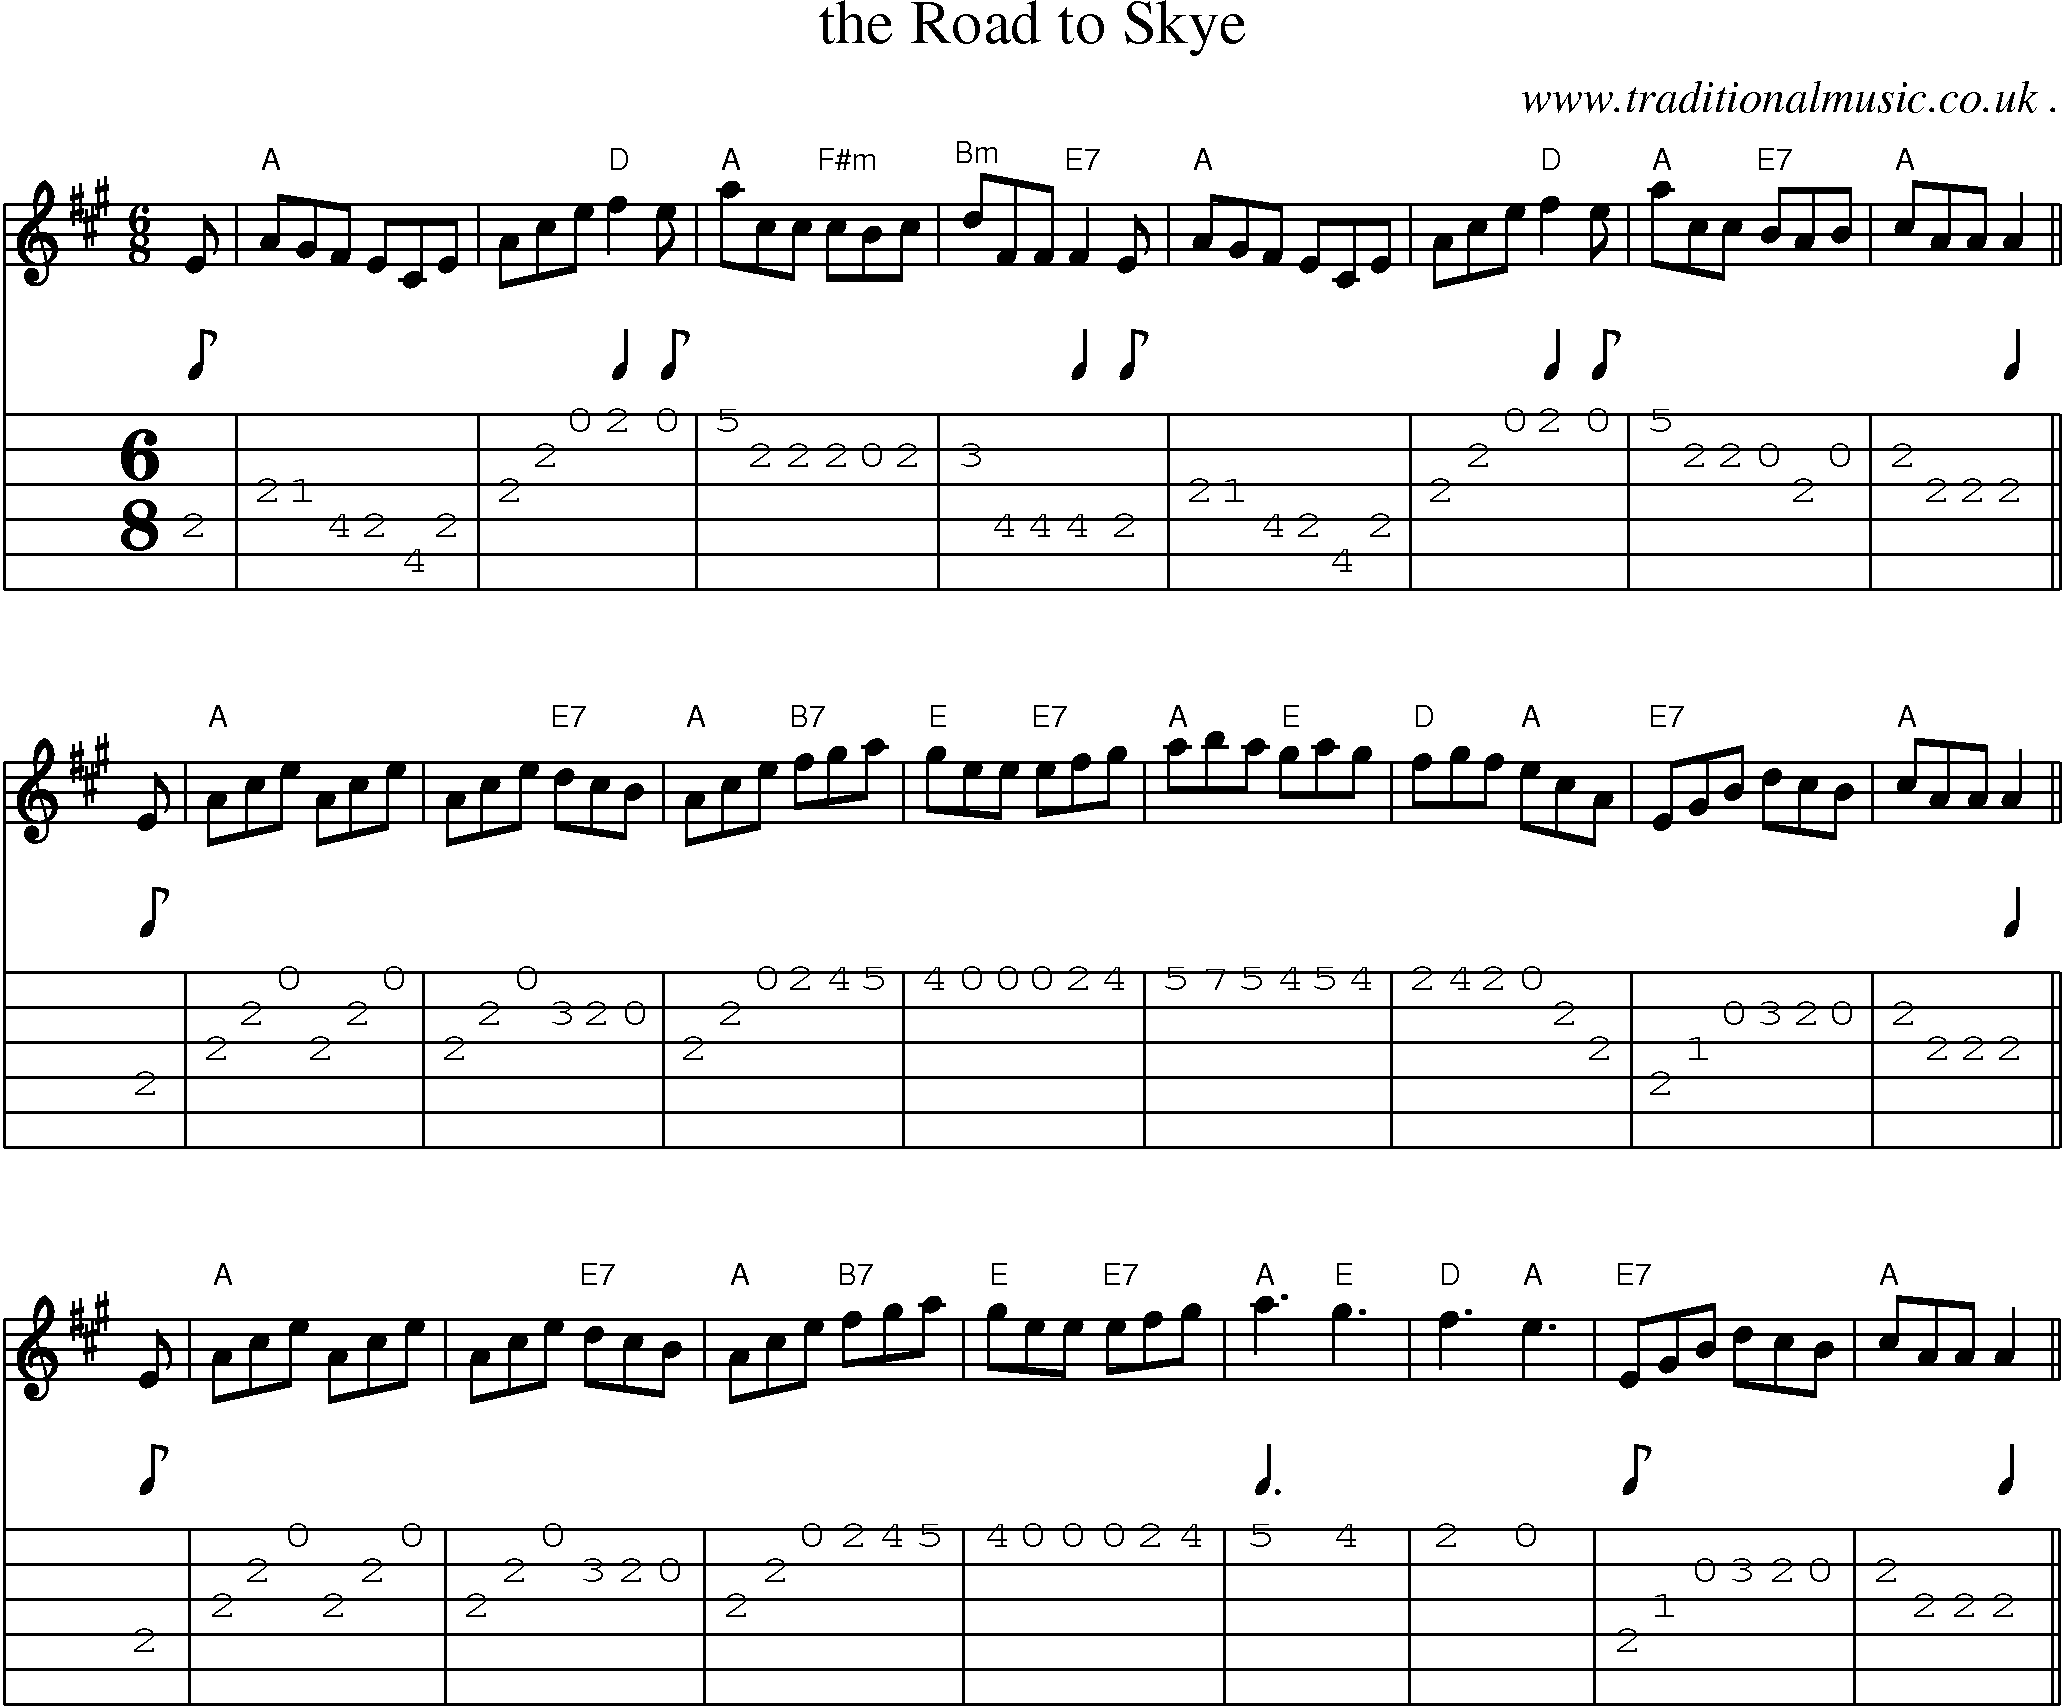 Sheet-music  score, Chords and Guitar Tabs for The Road To Skye